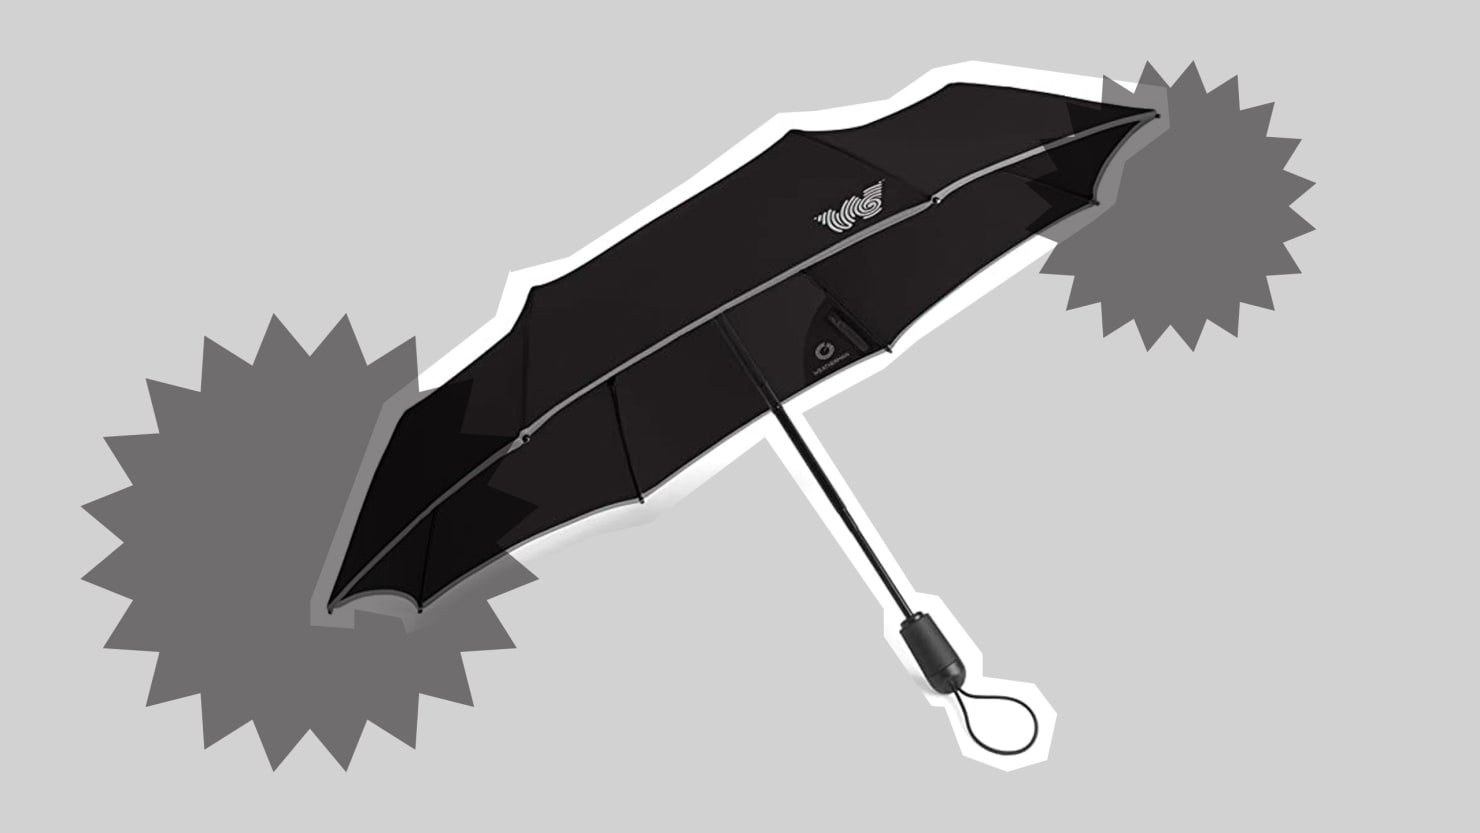 This Meteorologist-Invented Umbrella Will Make You Wish for Rain